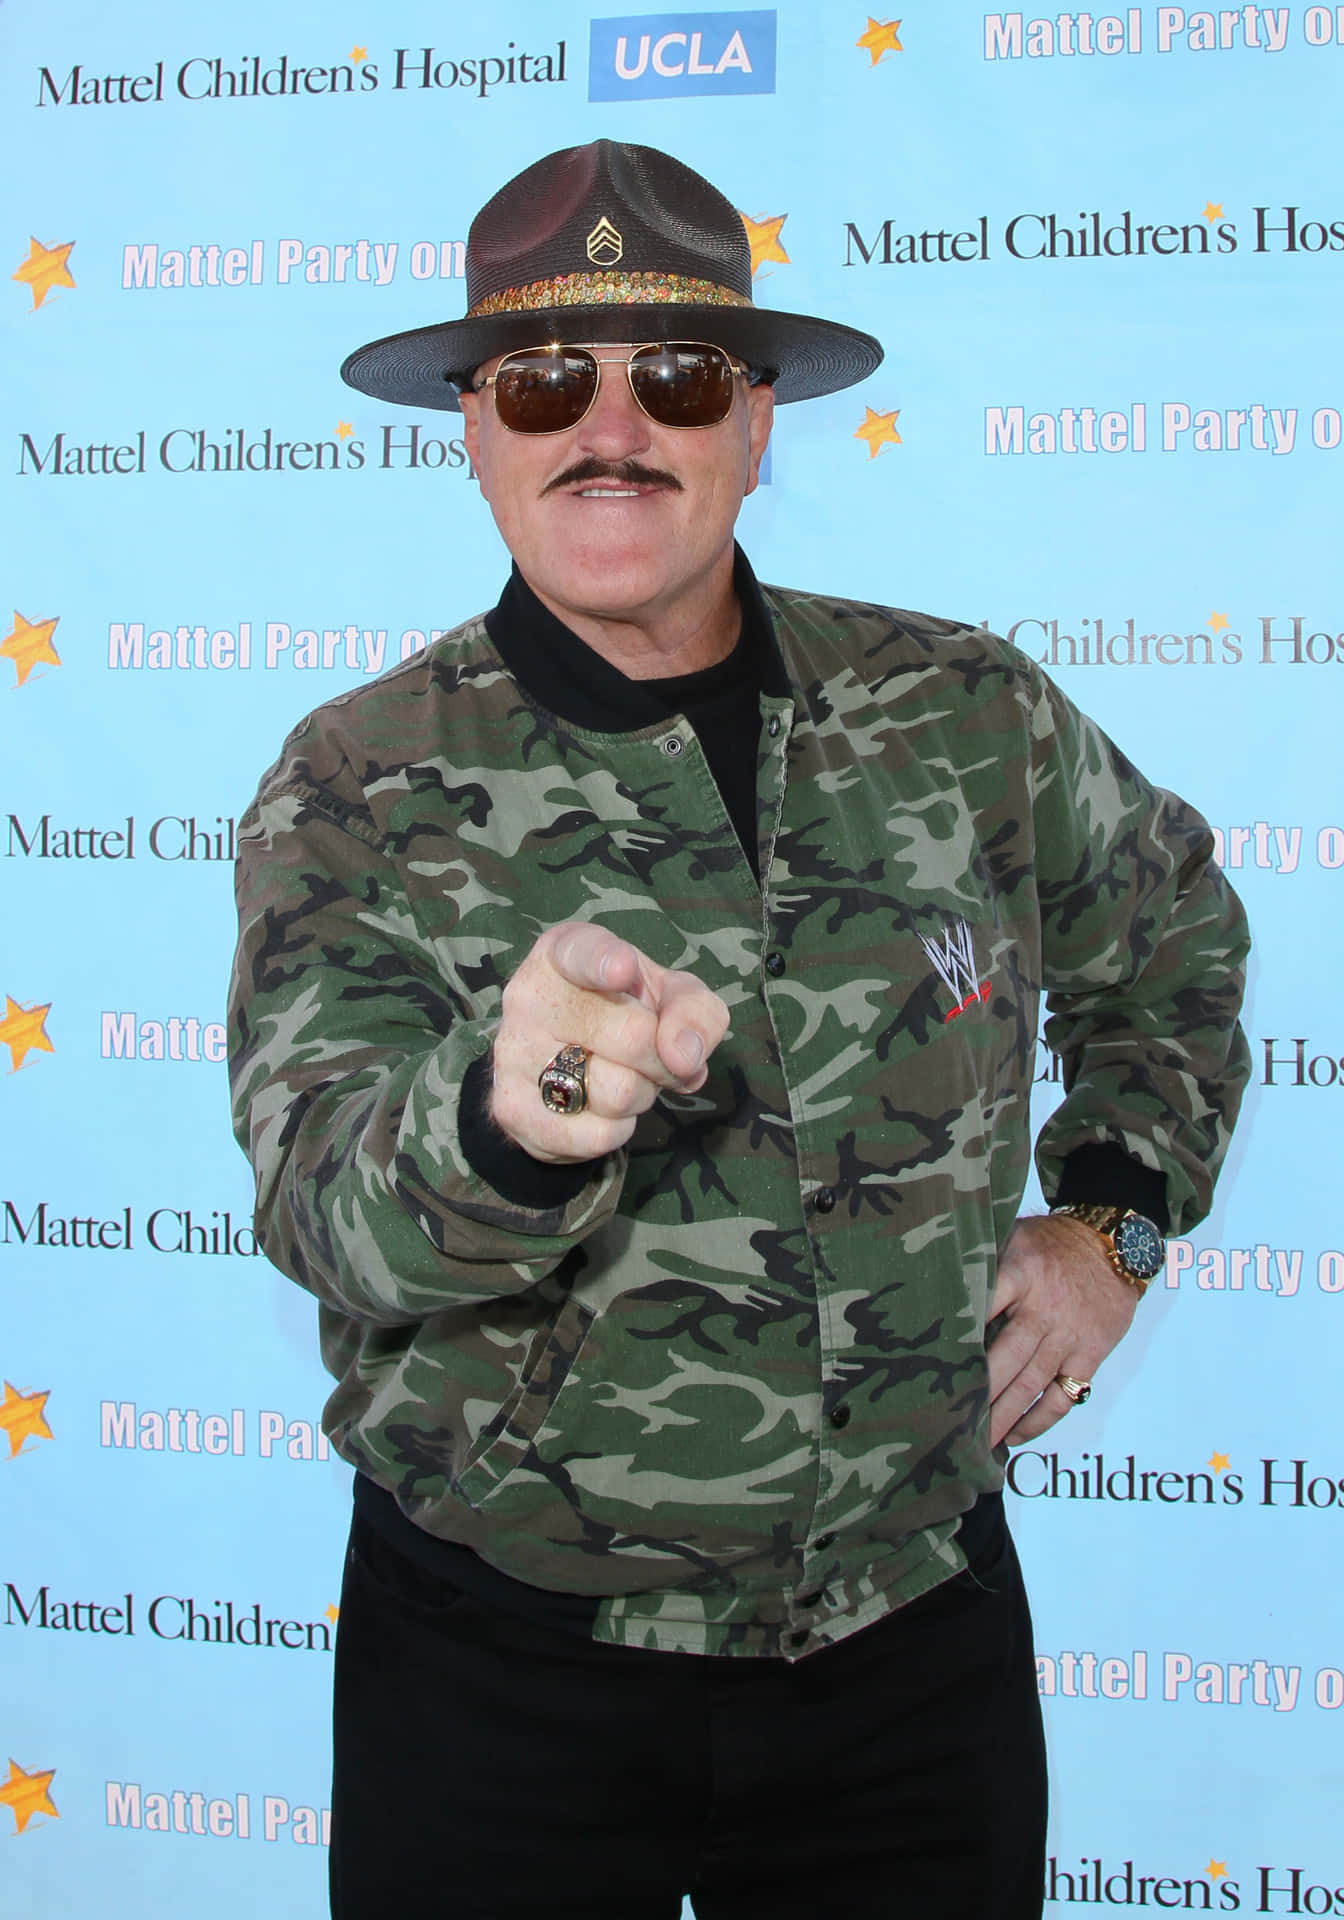 Sgt Slaughter 12th Annual Mattel Party Wallpaper